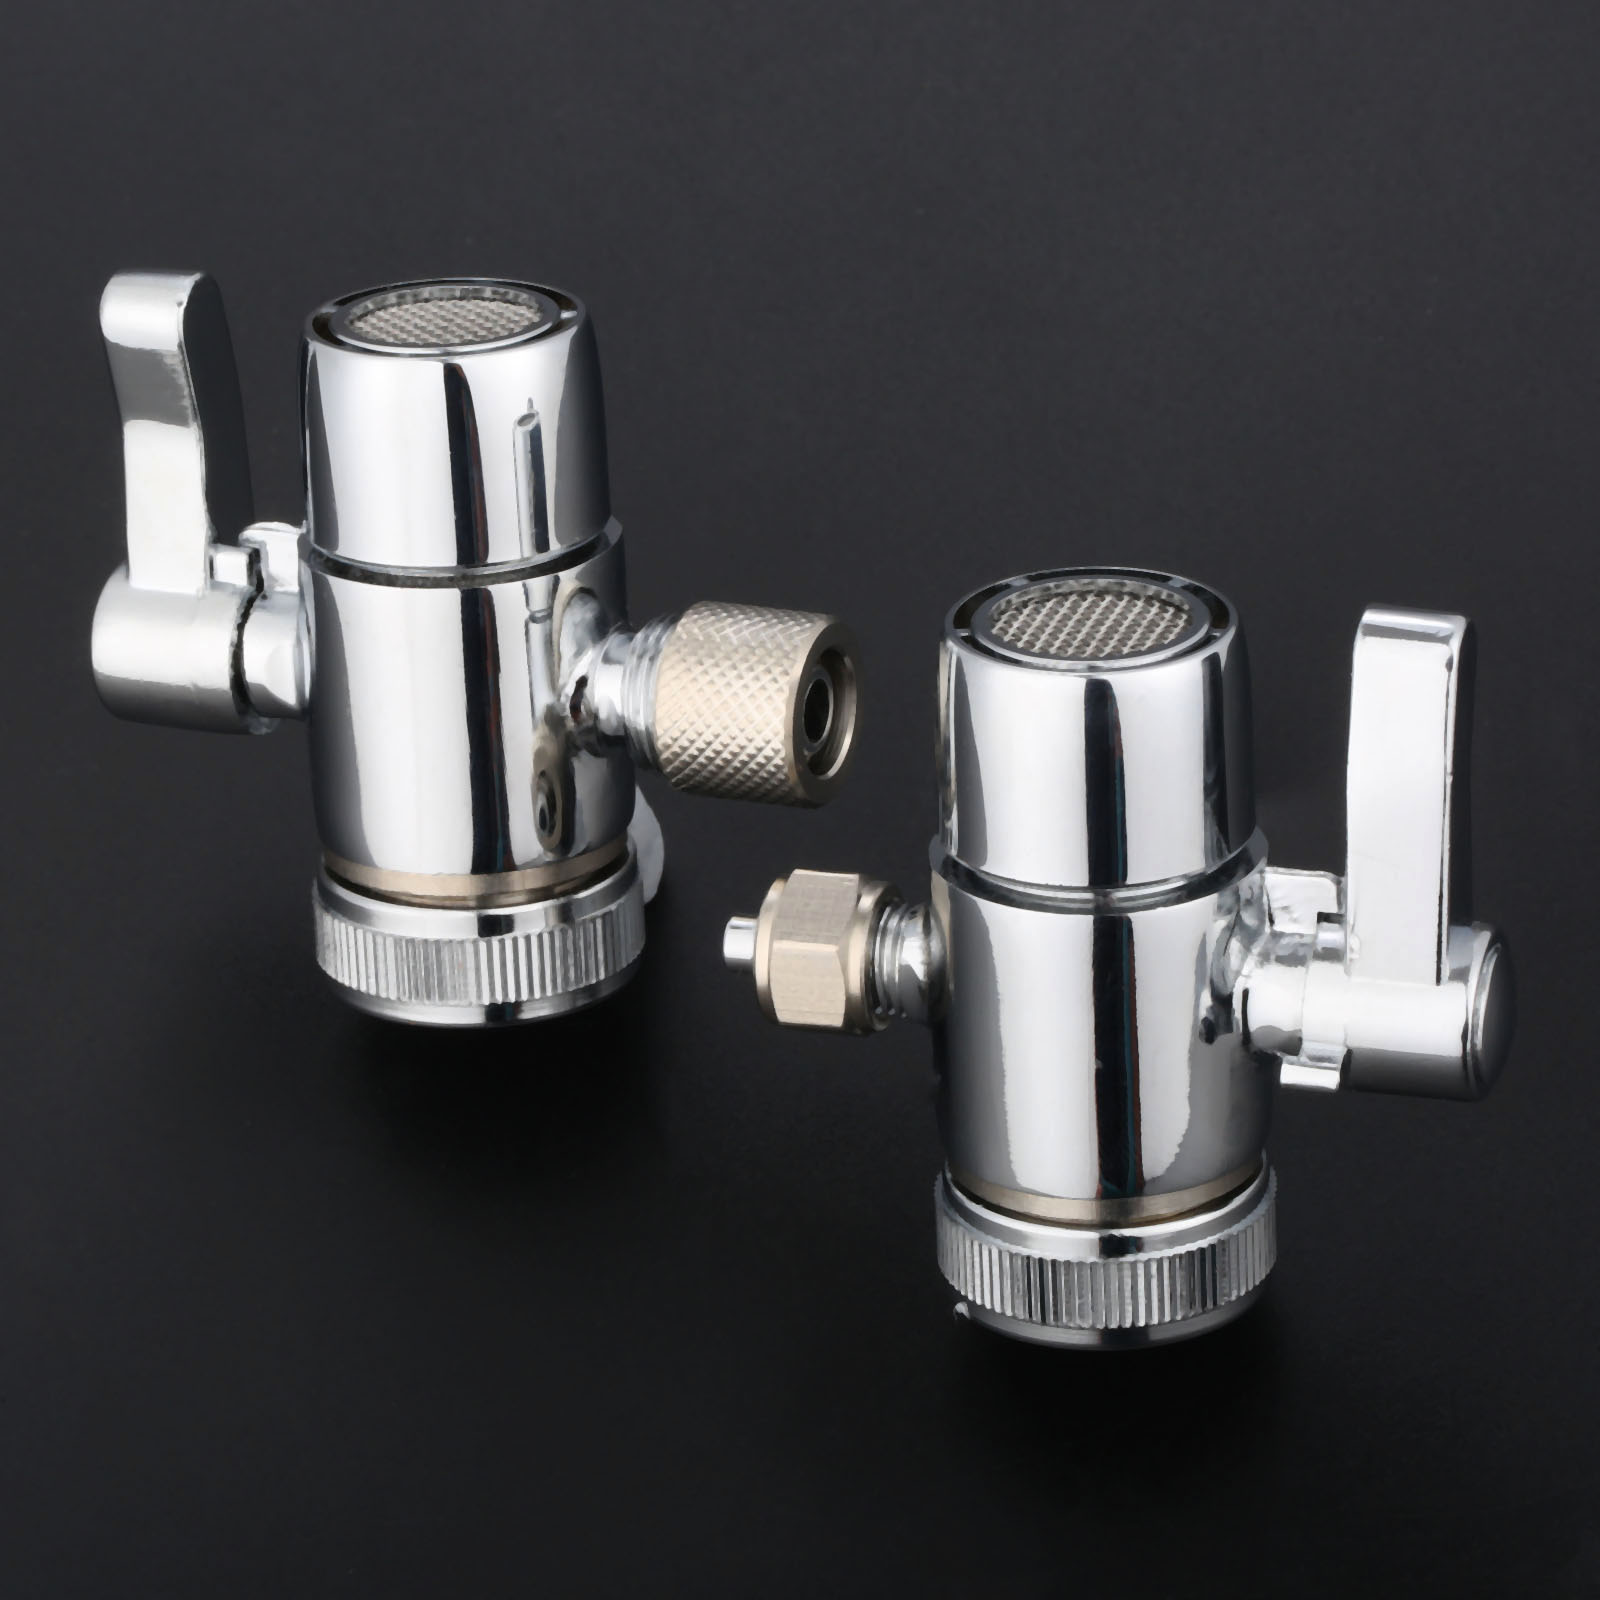 Tap Adapter,Faucet Adapter,1//4inch Universal Water Filter Faucet Tap Adapter Outlet Diverter Valve